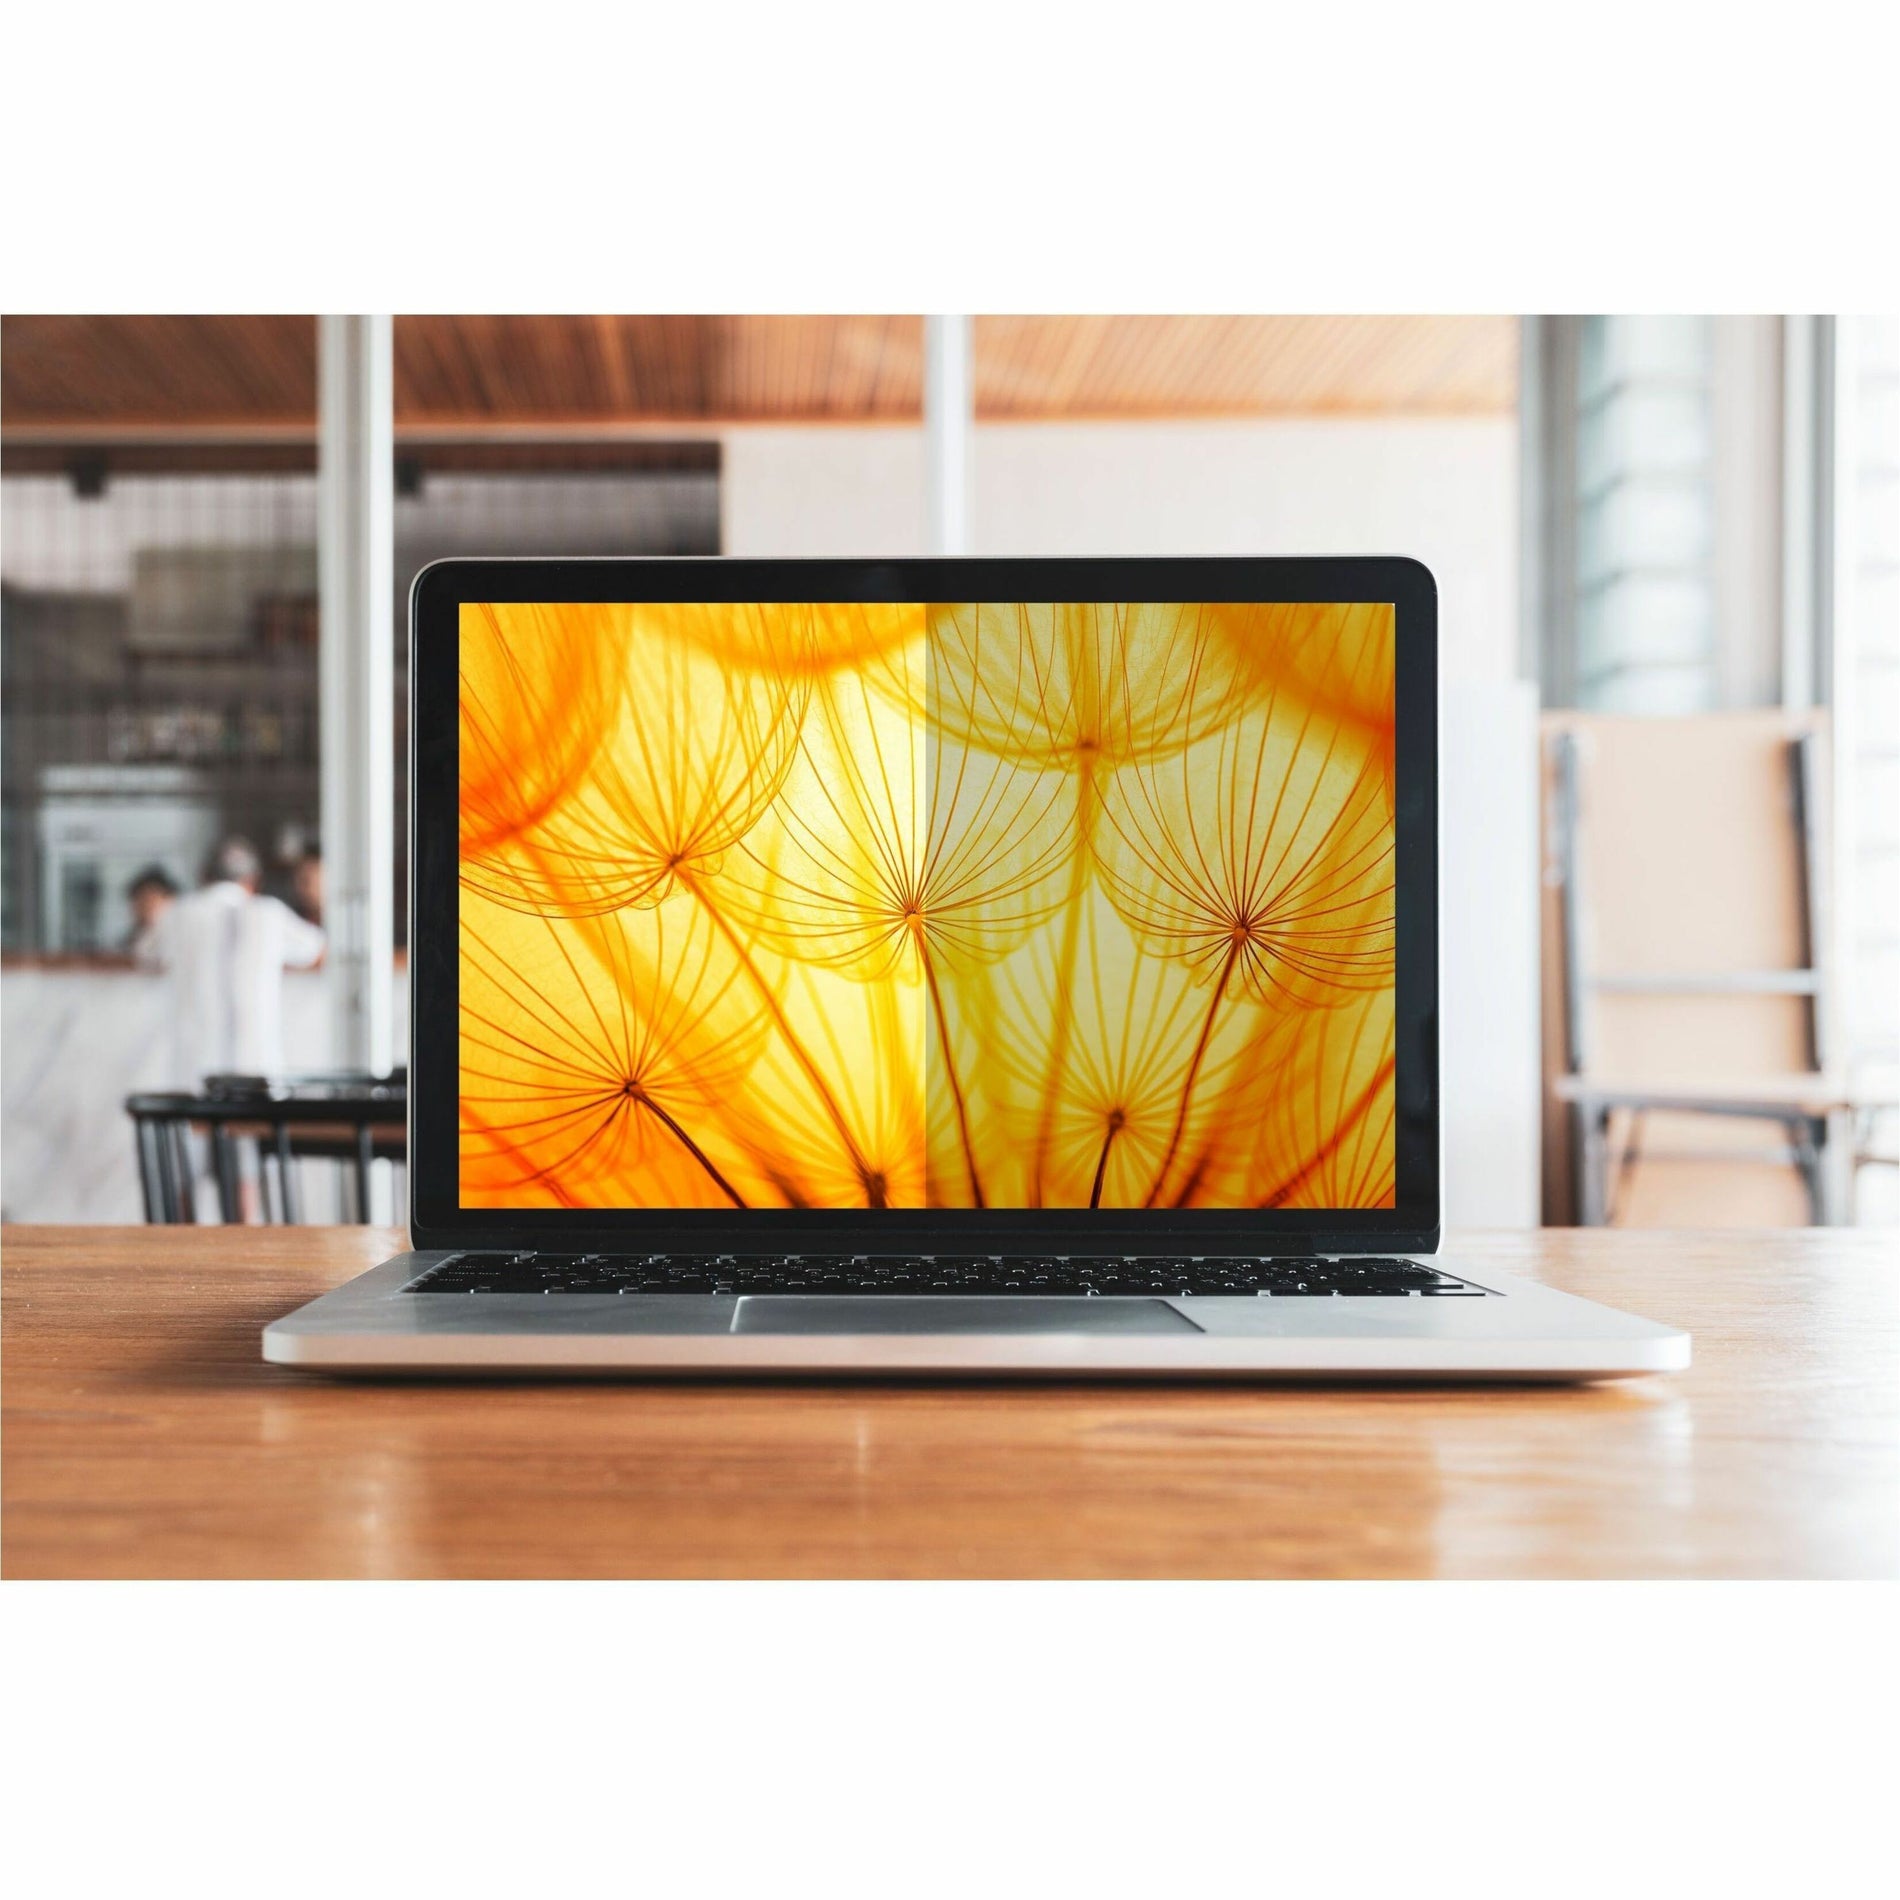 3M BP170W1B Bright Screen Privacy Filter for 17in Laptop, 16:10, Easy Application, Blue Light Reduction